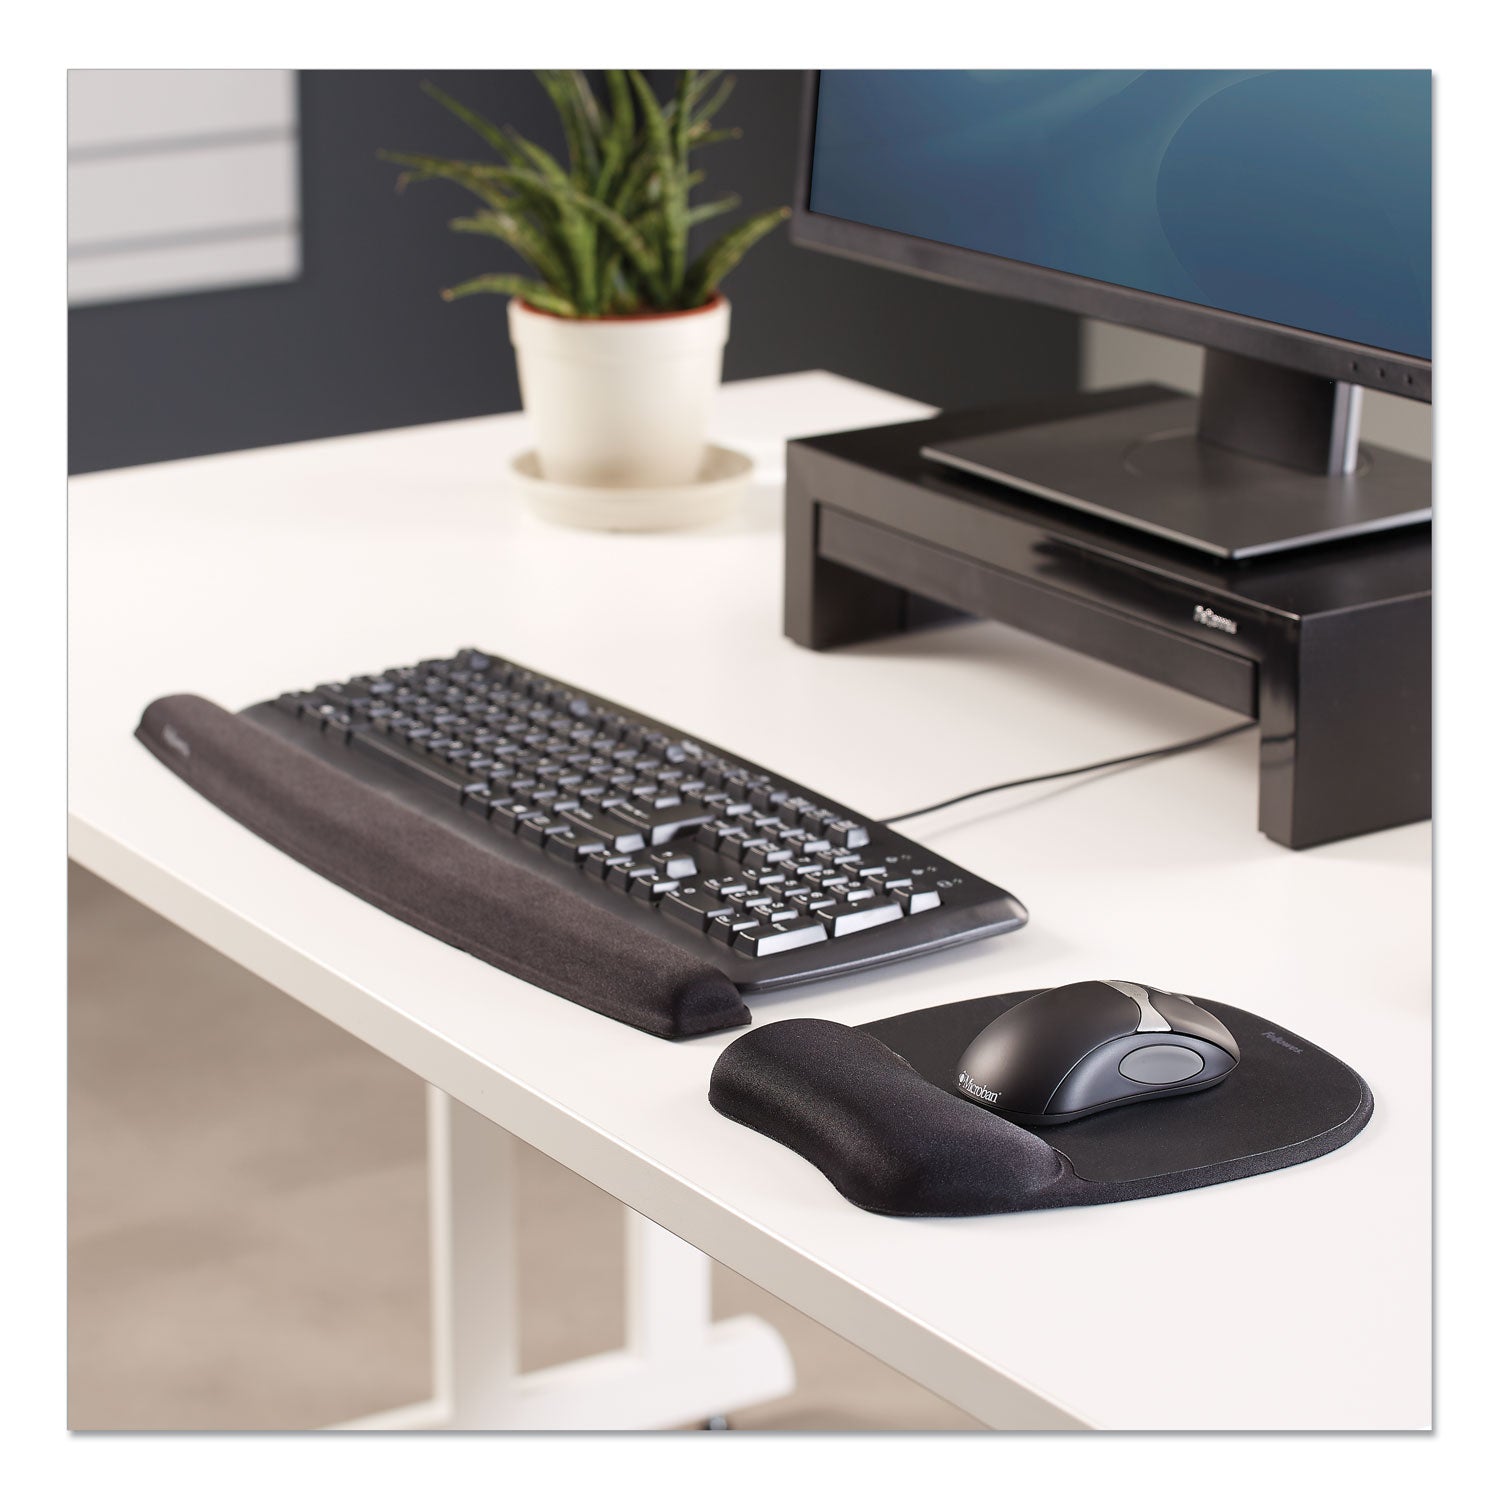 Memory Foam Mouse Pad with Wrist Rest, 7.93 x 9.25, Black - 